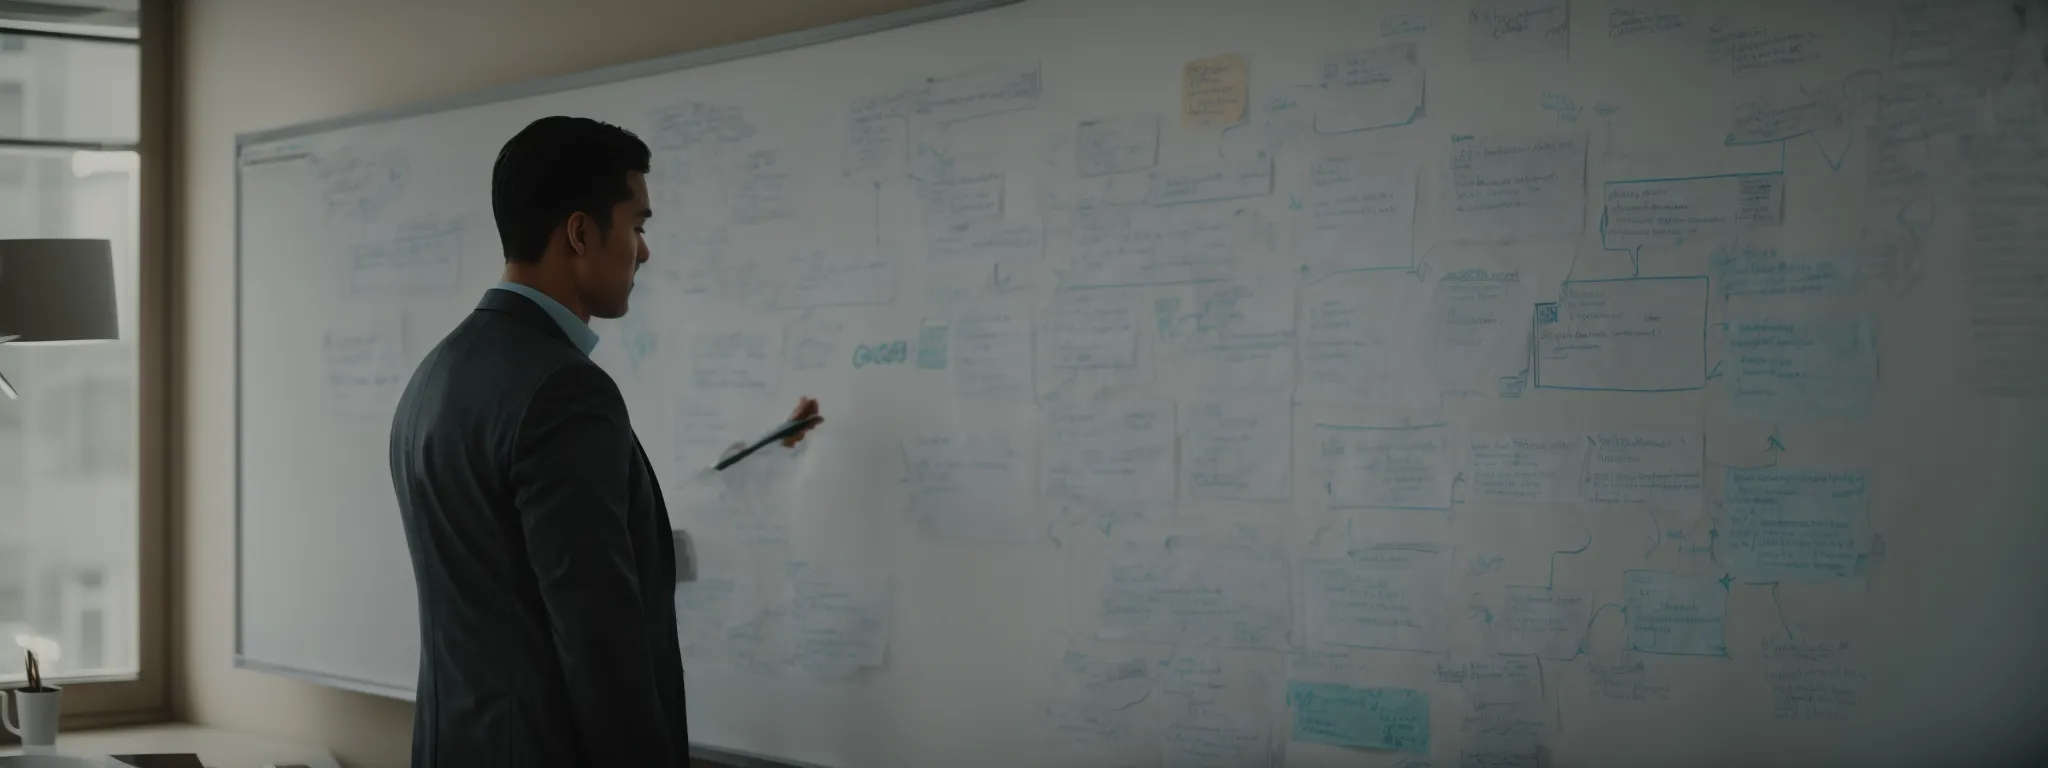 an individual brainstorming a marketing plan on a whiteboard with seo and social media strategy flowcharts.